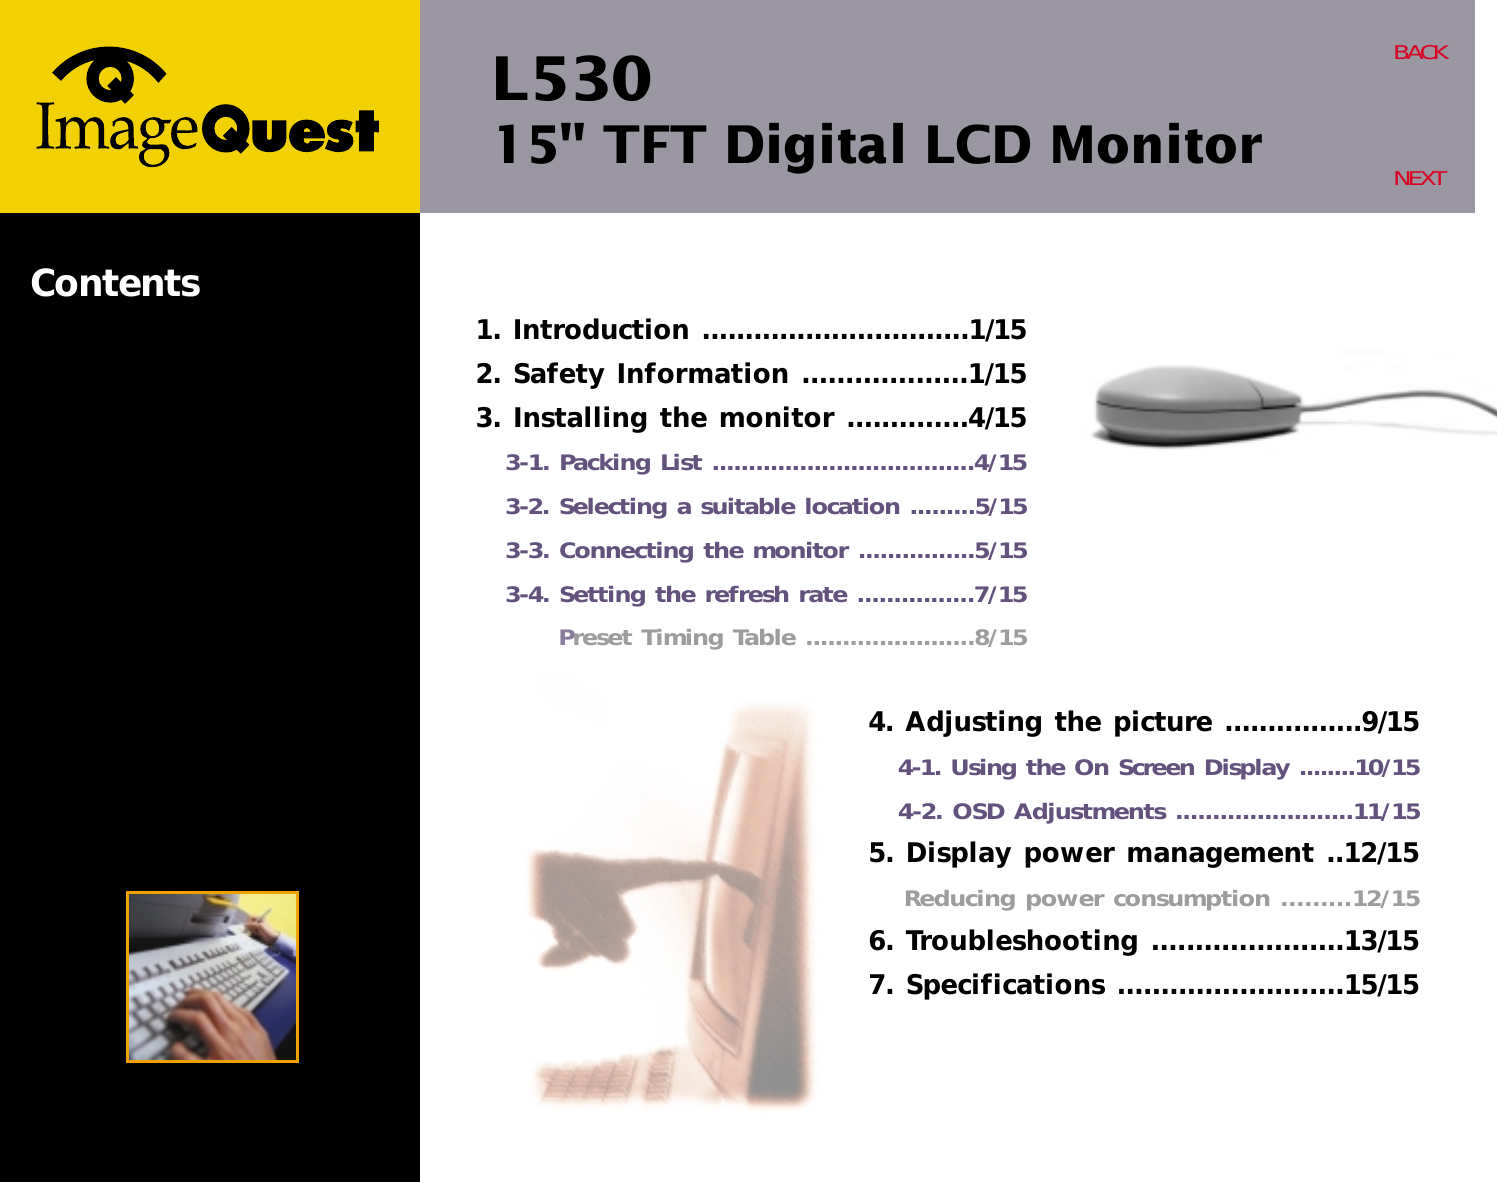 L53015&quot; TFT Digital LCD MonitorBACKNEXTContents4. Adjusting the picture ................9/154-1. Using the On Screen Display ........10/154-2. OSD Adjustments ........................11/155. Display power management ..12/15Reducing power consumption .........12/156. Troubleshooting ......................13/157. Specifications ..........................15/151. Introduction ...............................1/152. Safety Information ...................1/153. Installing the monitor ..............4/153-1. Packing List ....................................4/153-2. Selecting a suitable location .........5/153-3. Connecting the monitor ................5/153-4. Setting the refresh rate ................7/15Preset Timing Table .......................8/15